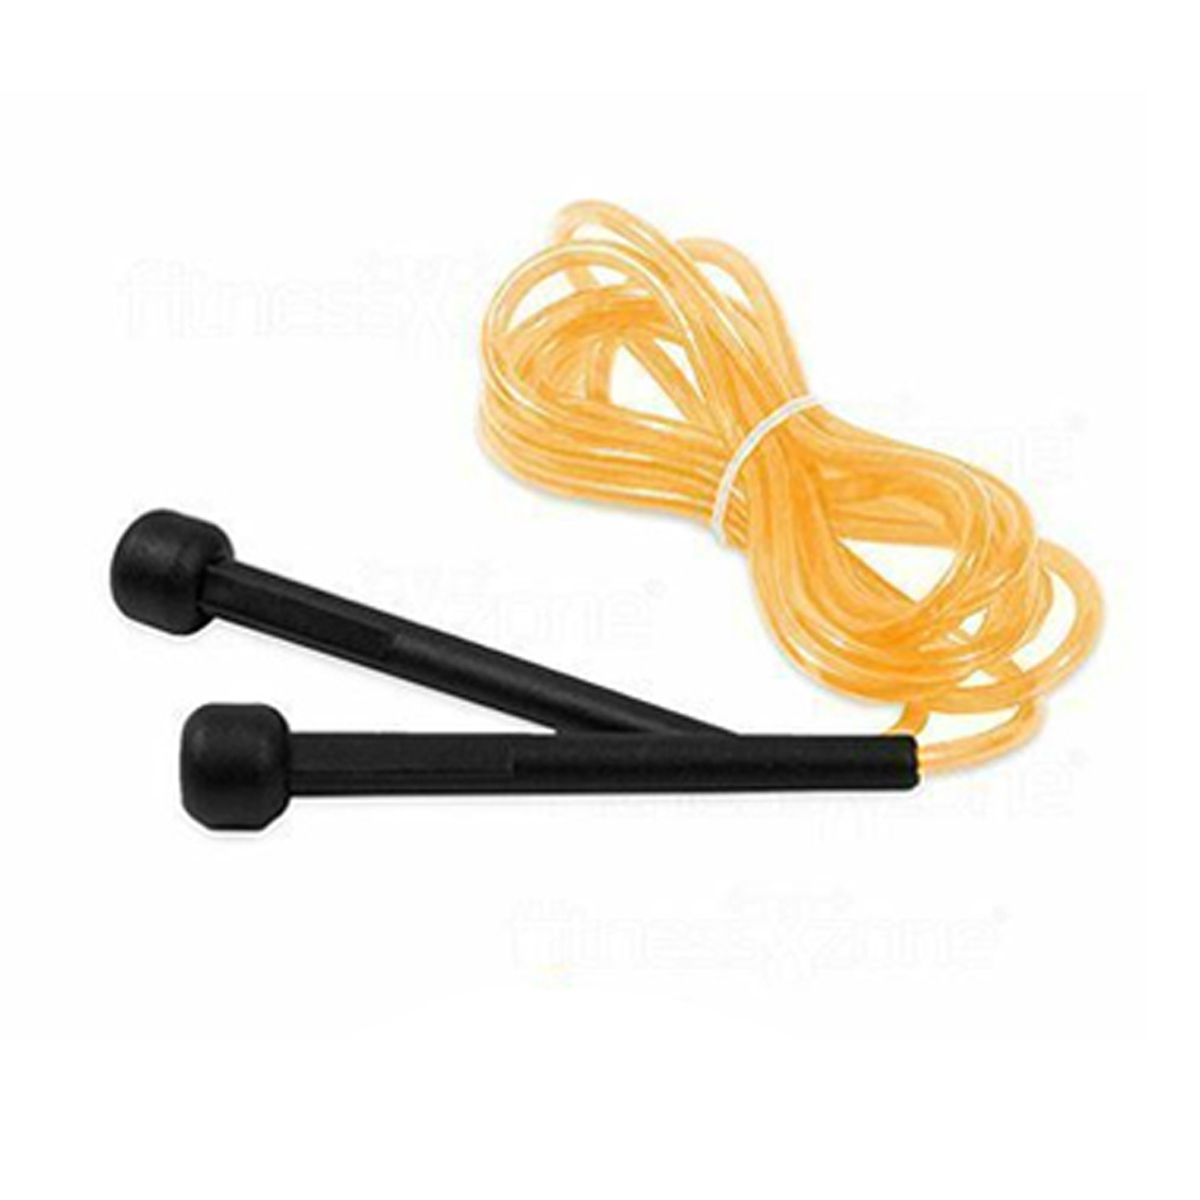 9ft28m-Length-PVC-Skipping-Rope-Home-Sports-Kids-Rope-Jumping-Gym-Fitness-Exercise-Rope-1661342-4